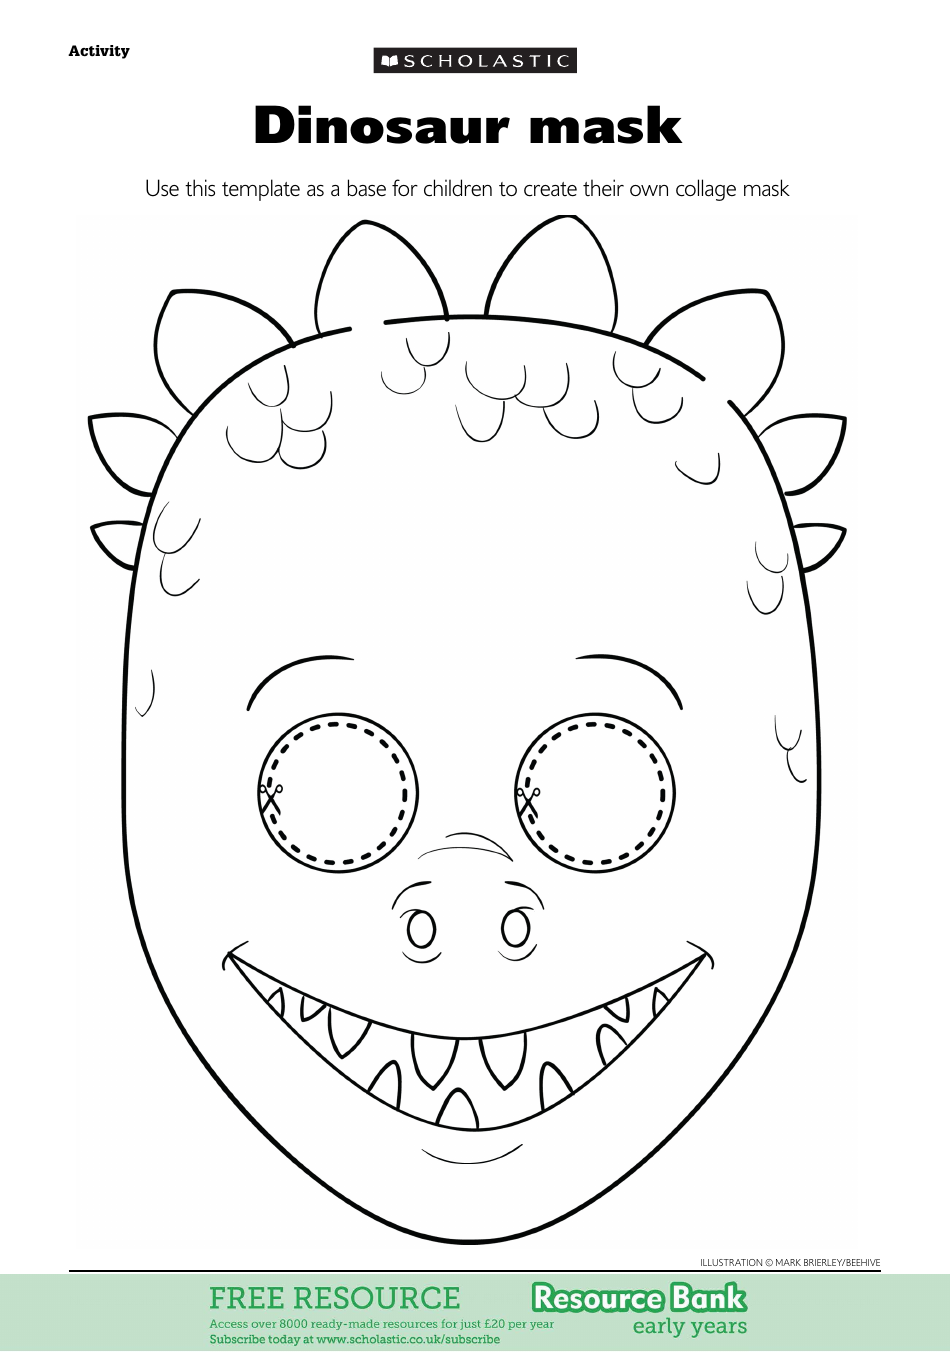 Dinosaur Mask Coloring Template, Page 1